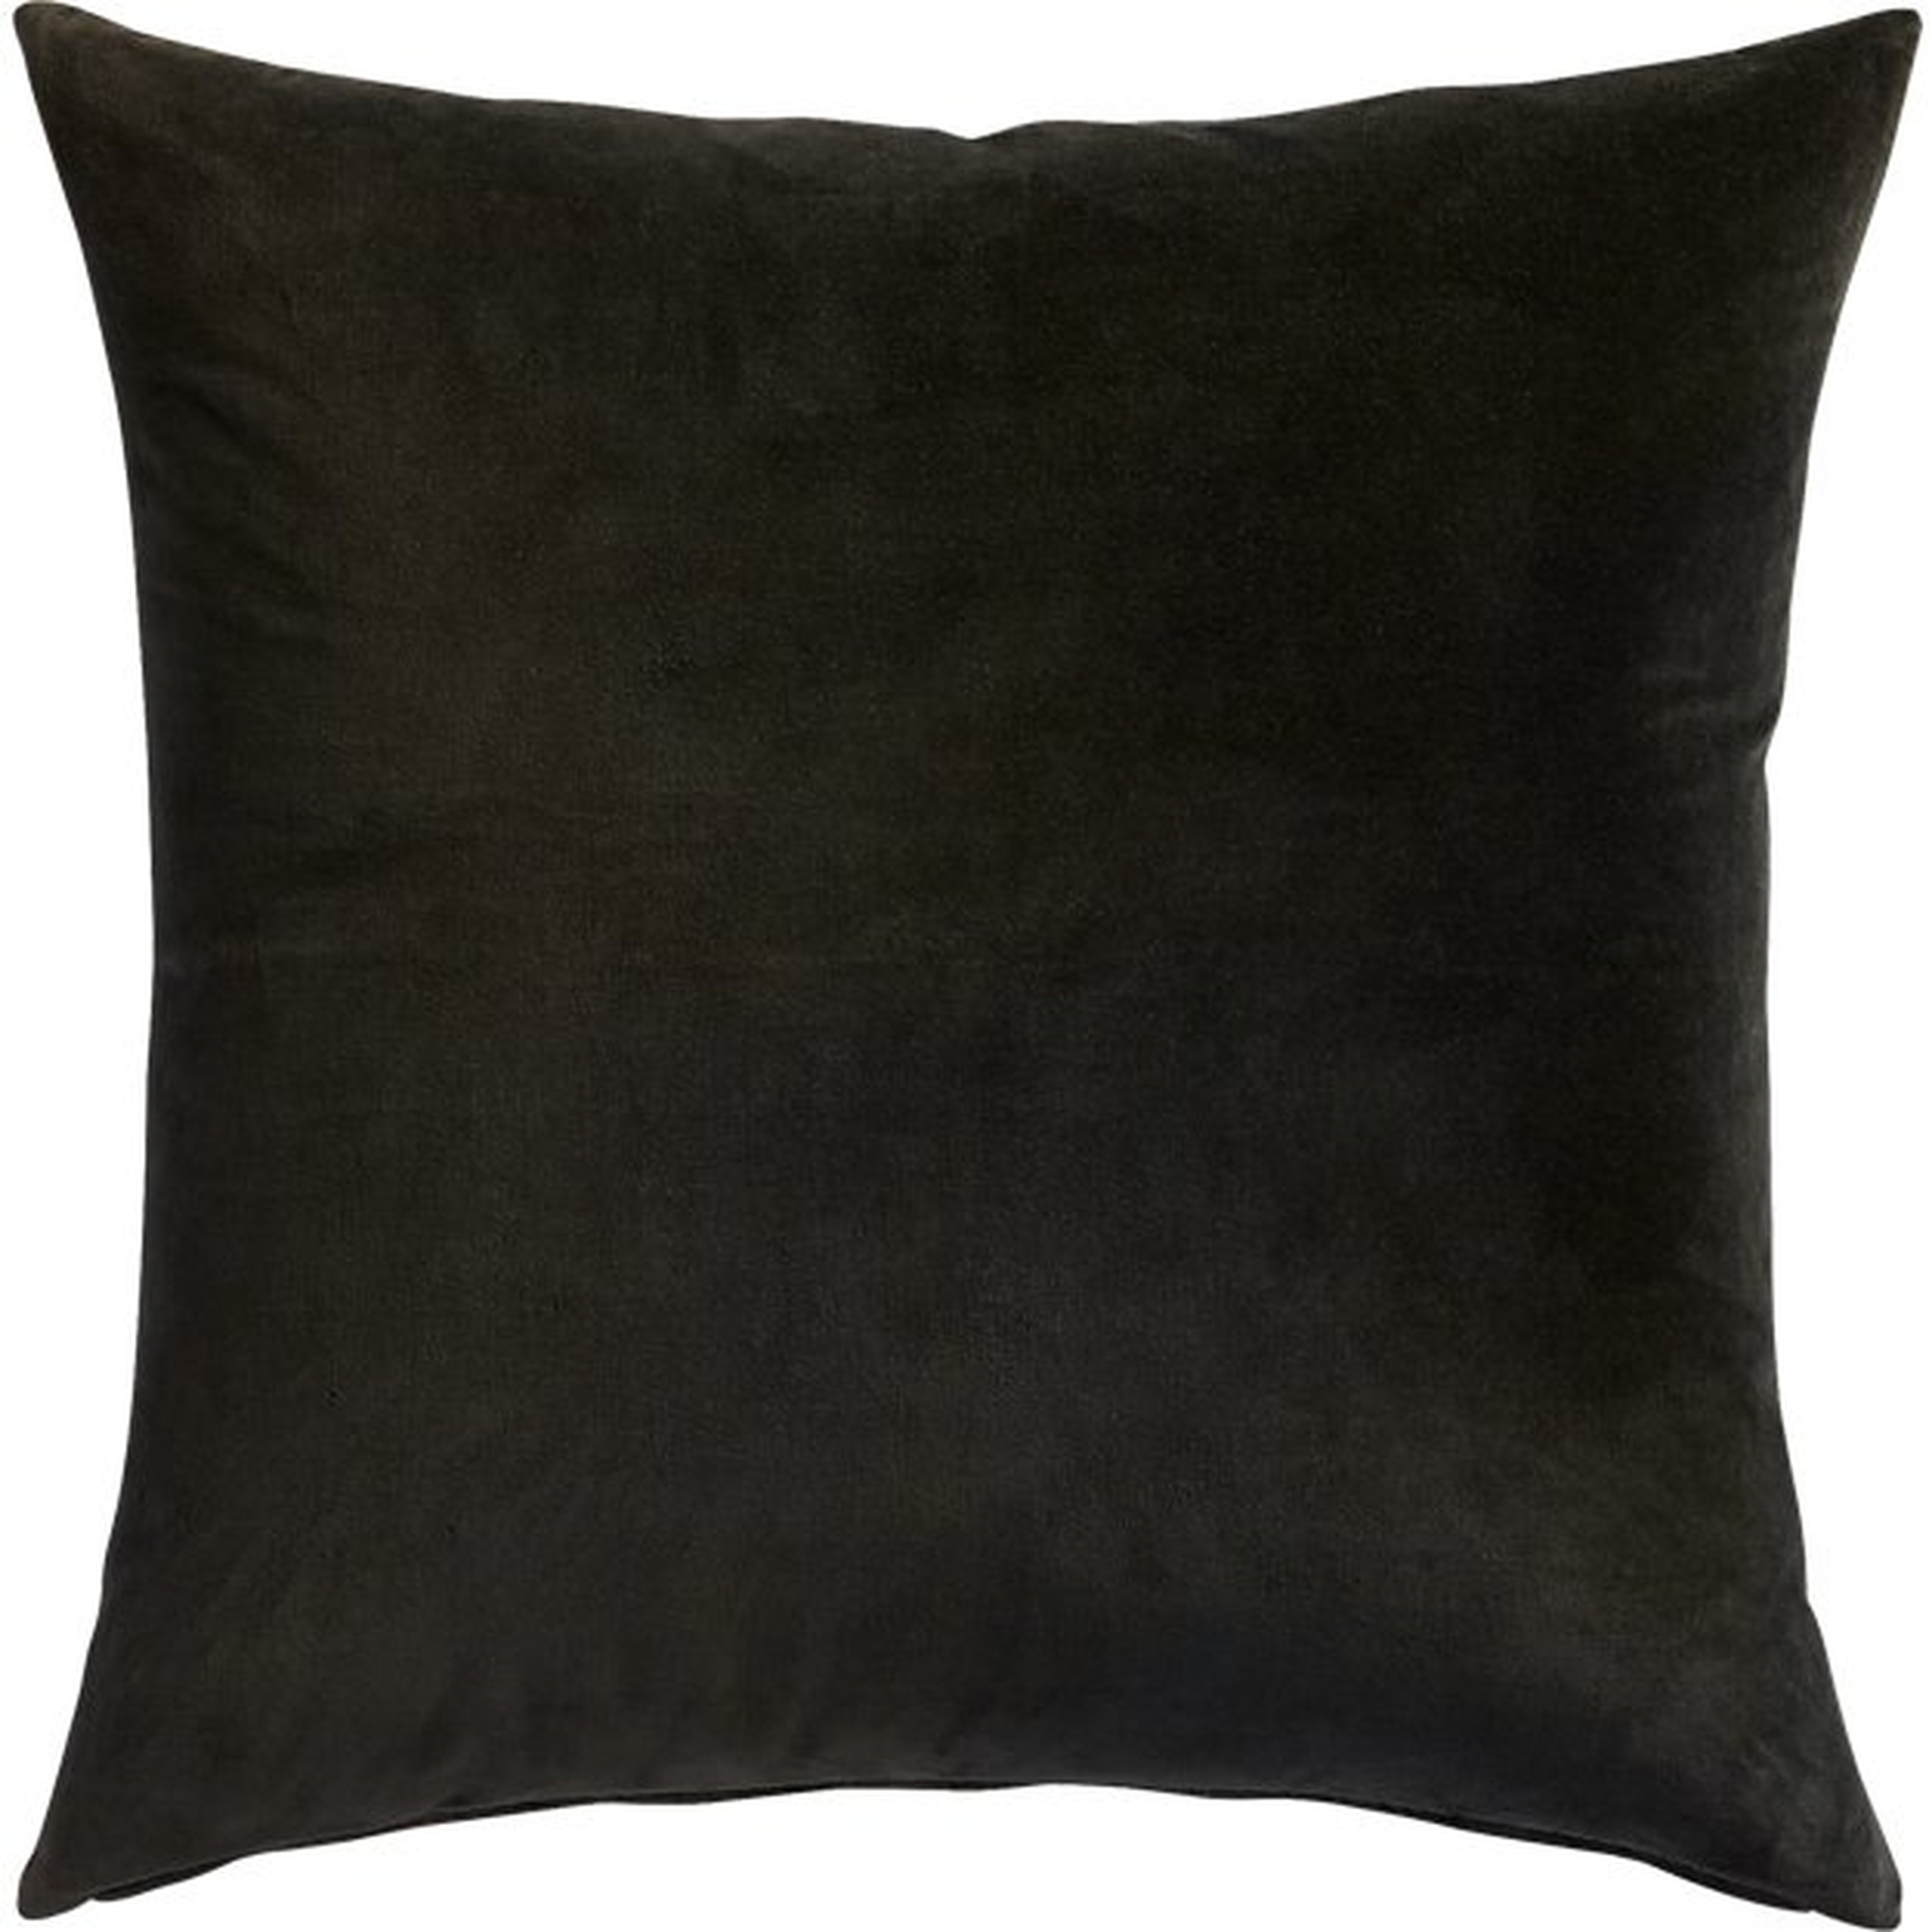 Leisure Black Velvet Throw Pillow with Feather-Down Insert 23" - CB2